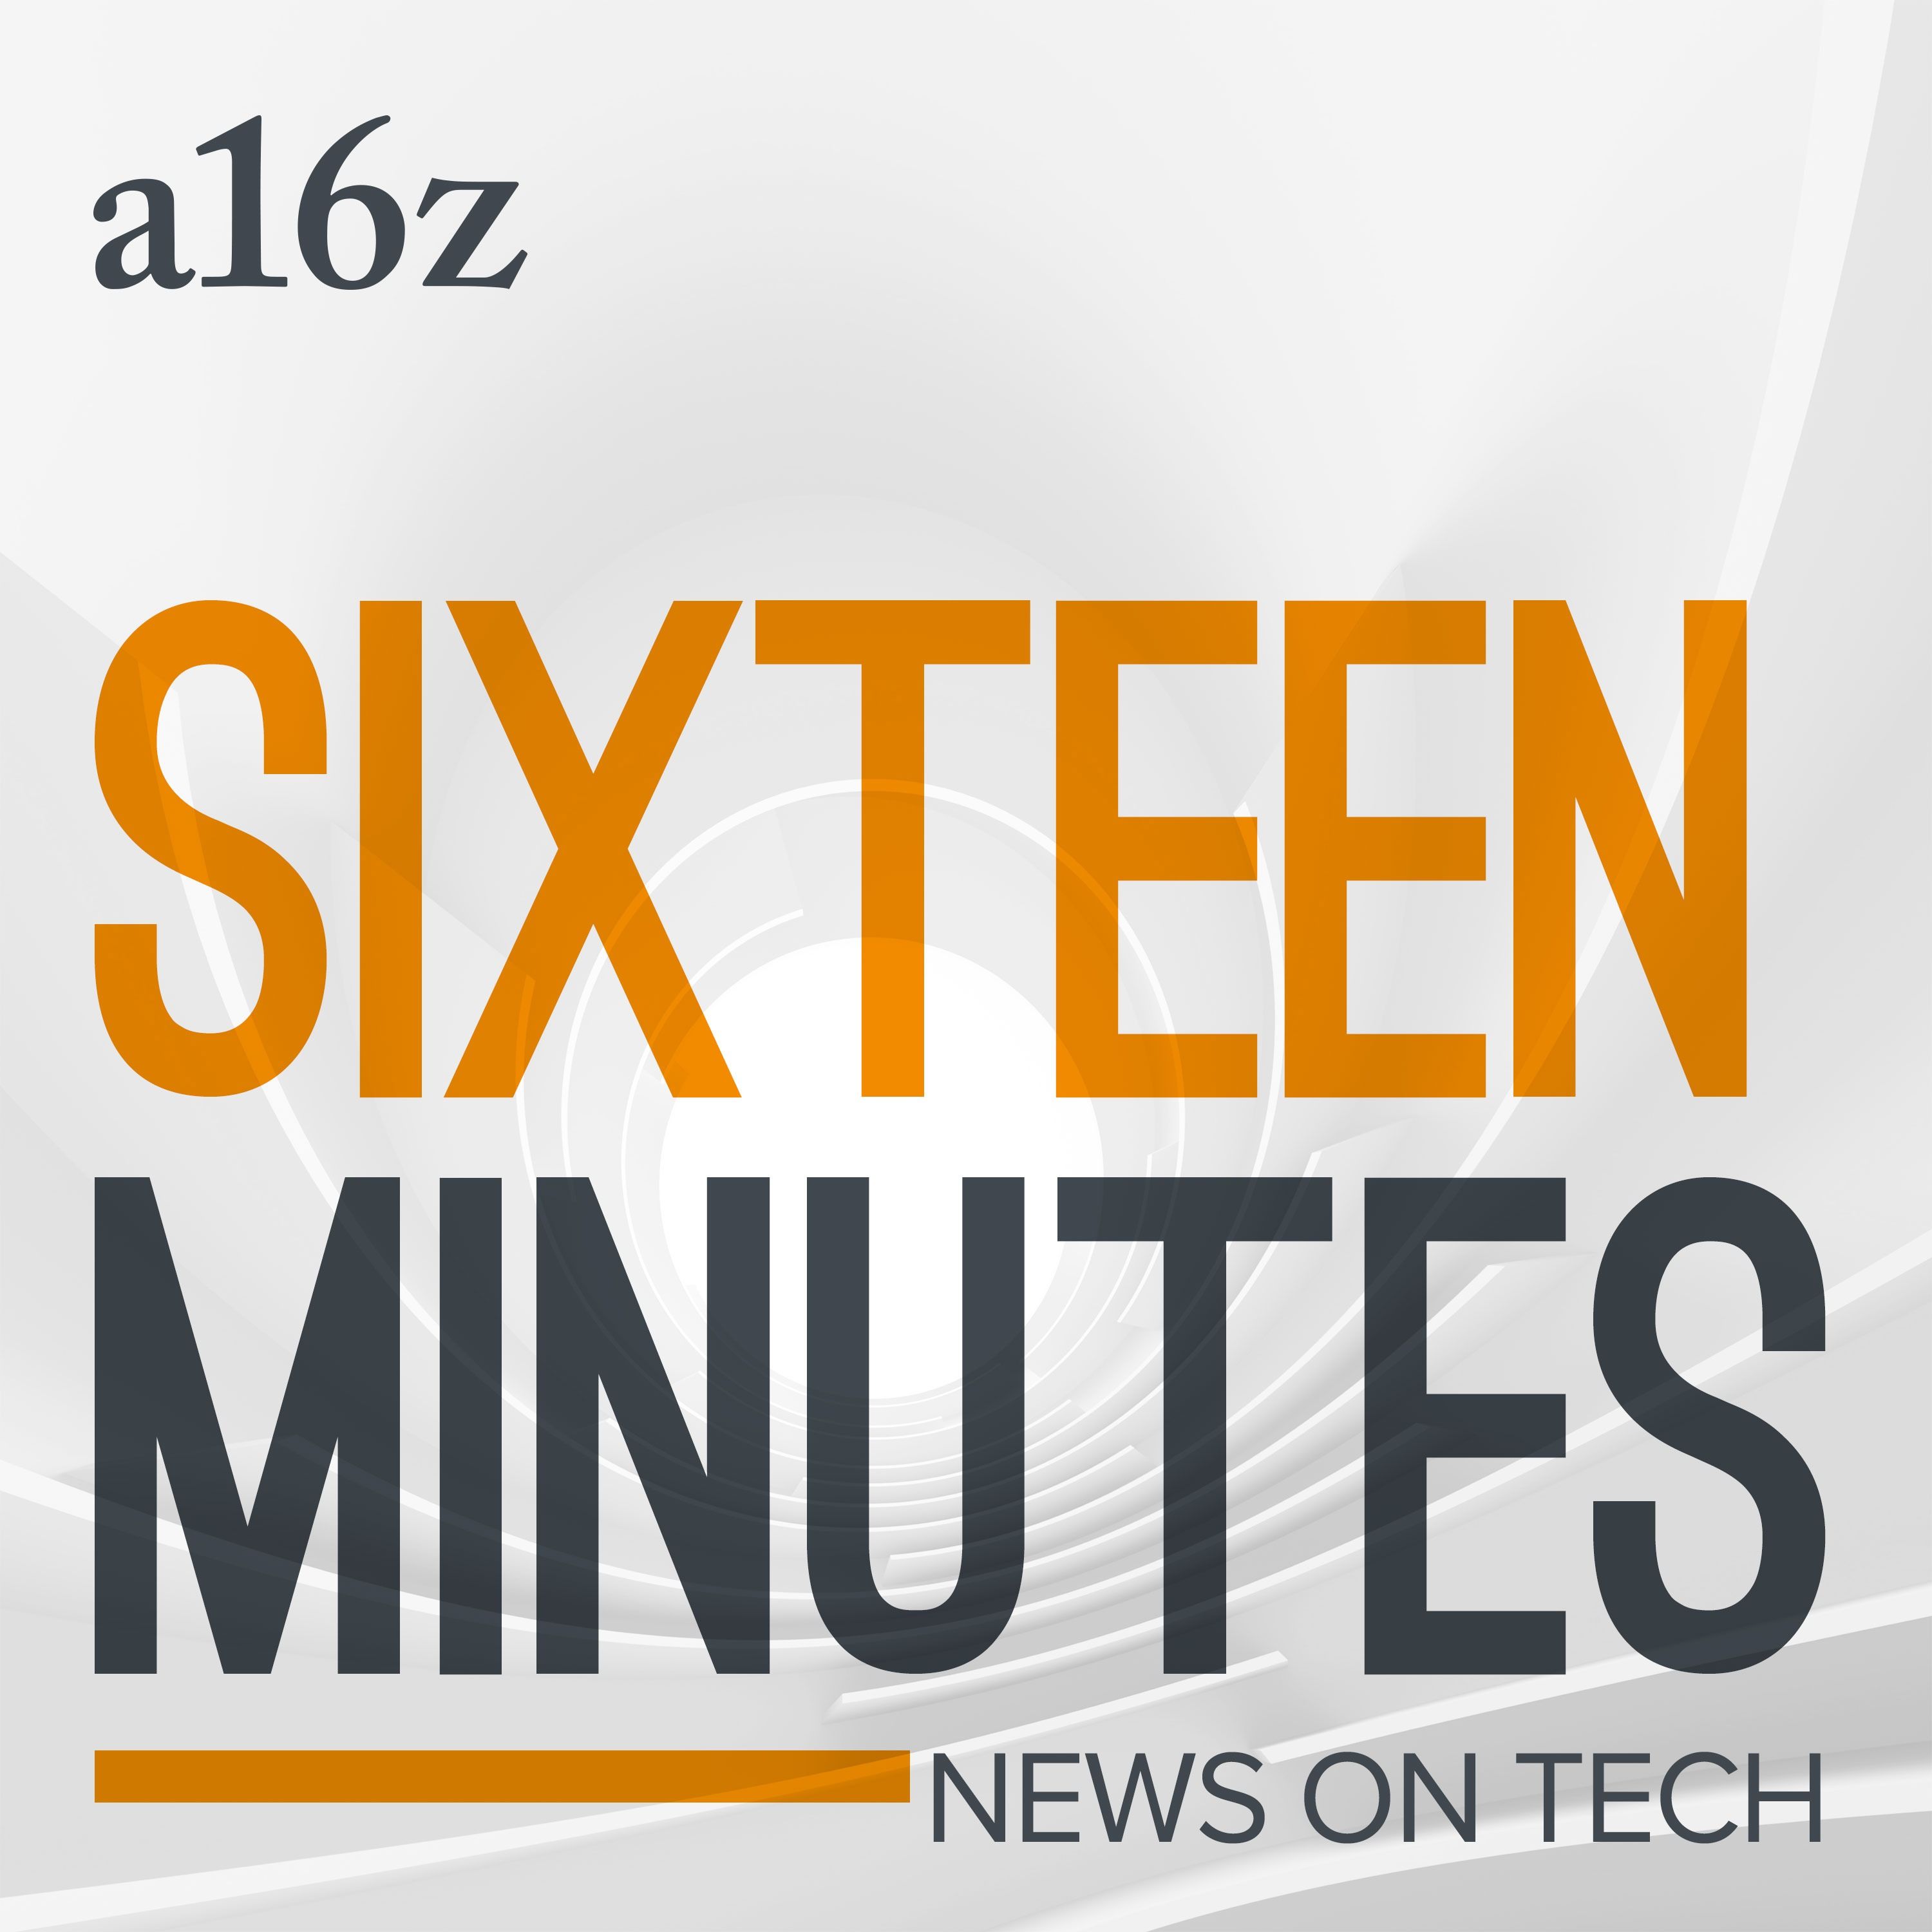 16 Minutes on the News #8: Apple Camera, Services; Wearables - Where are We